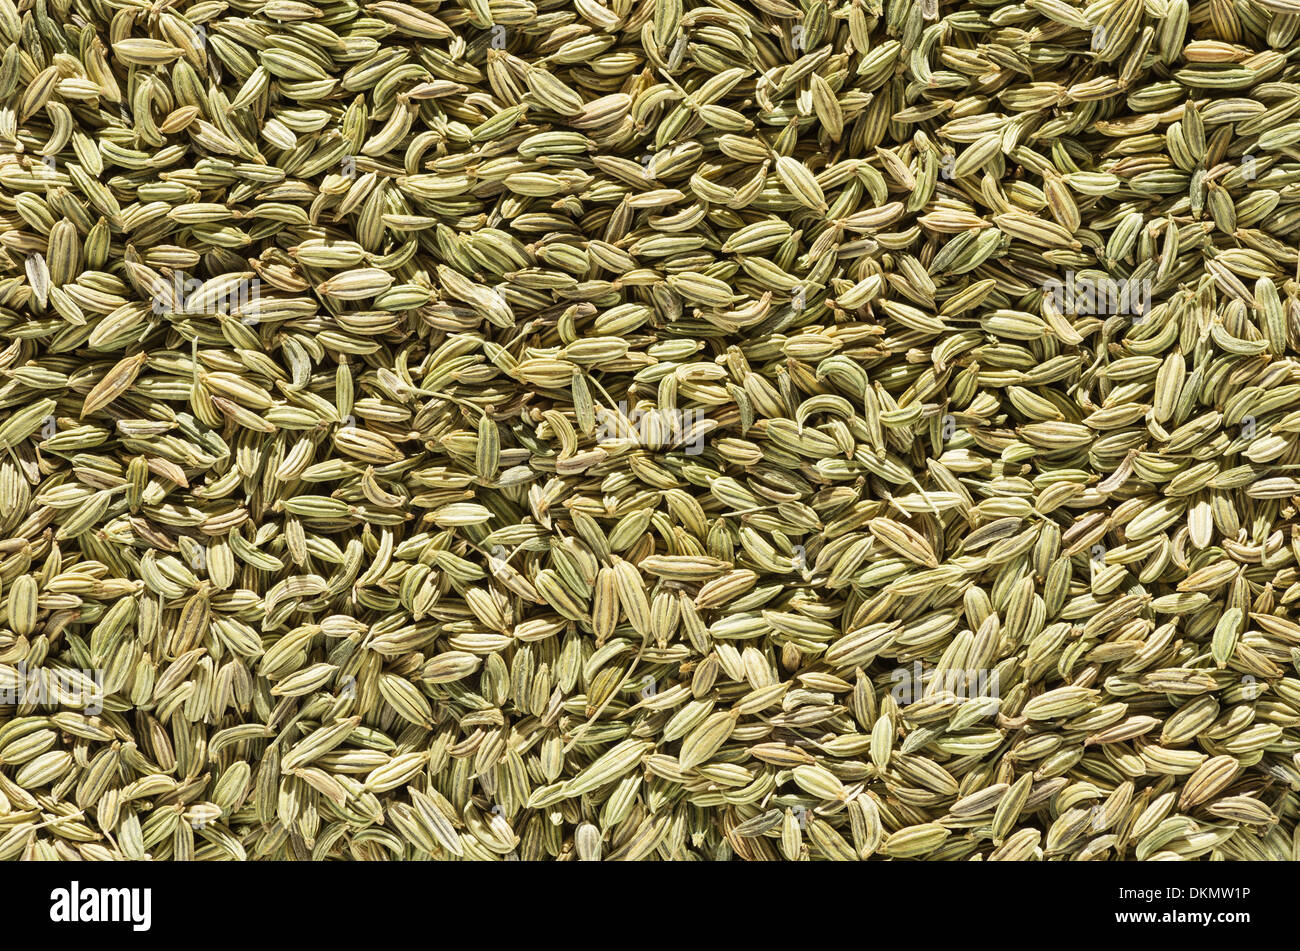 fennel seed spice macro background texture image Stock Photo